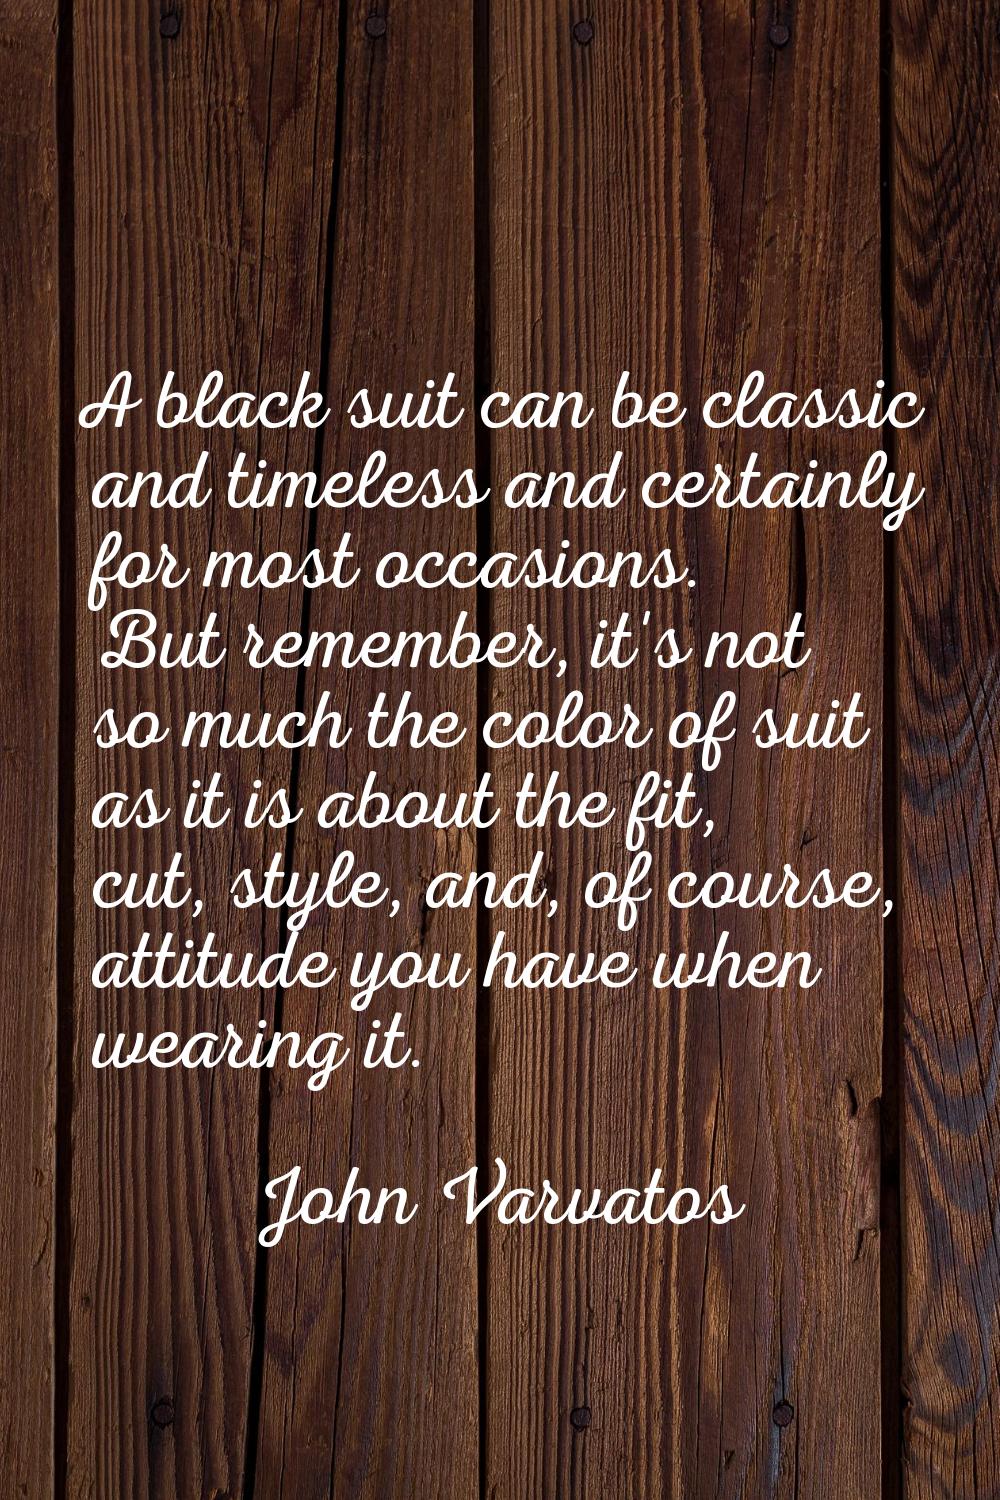 A black suit can be classic and timeless and certainly for most occasions. But remember, it's not s